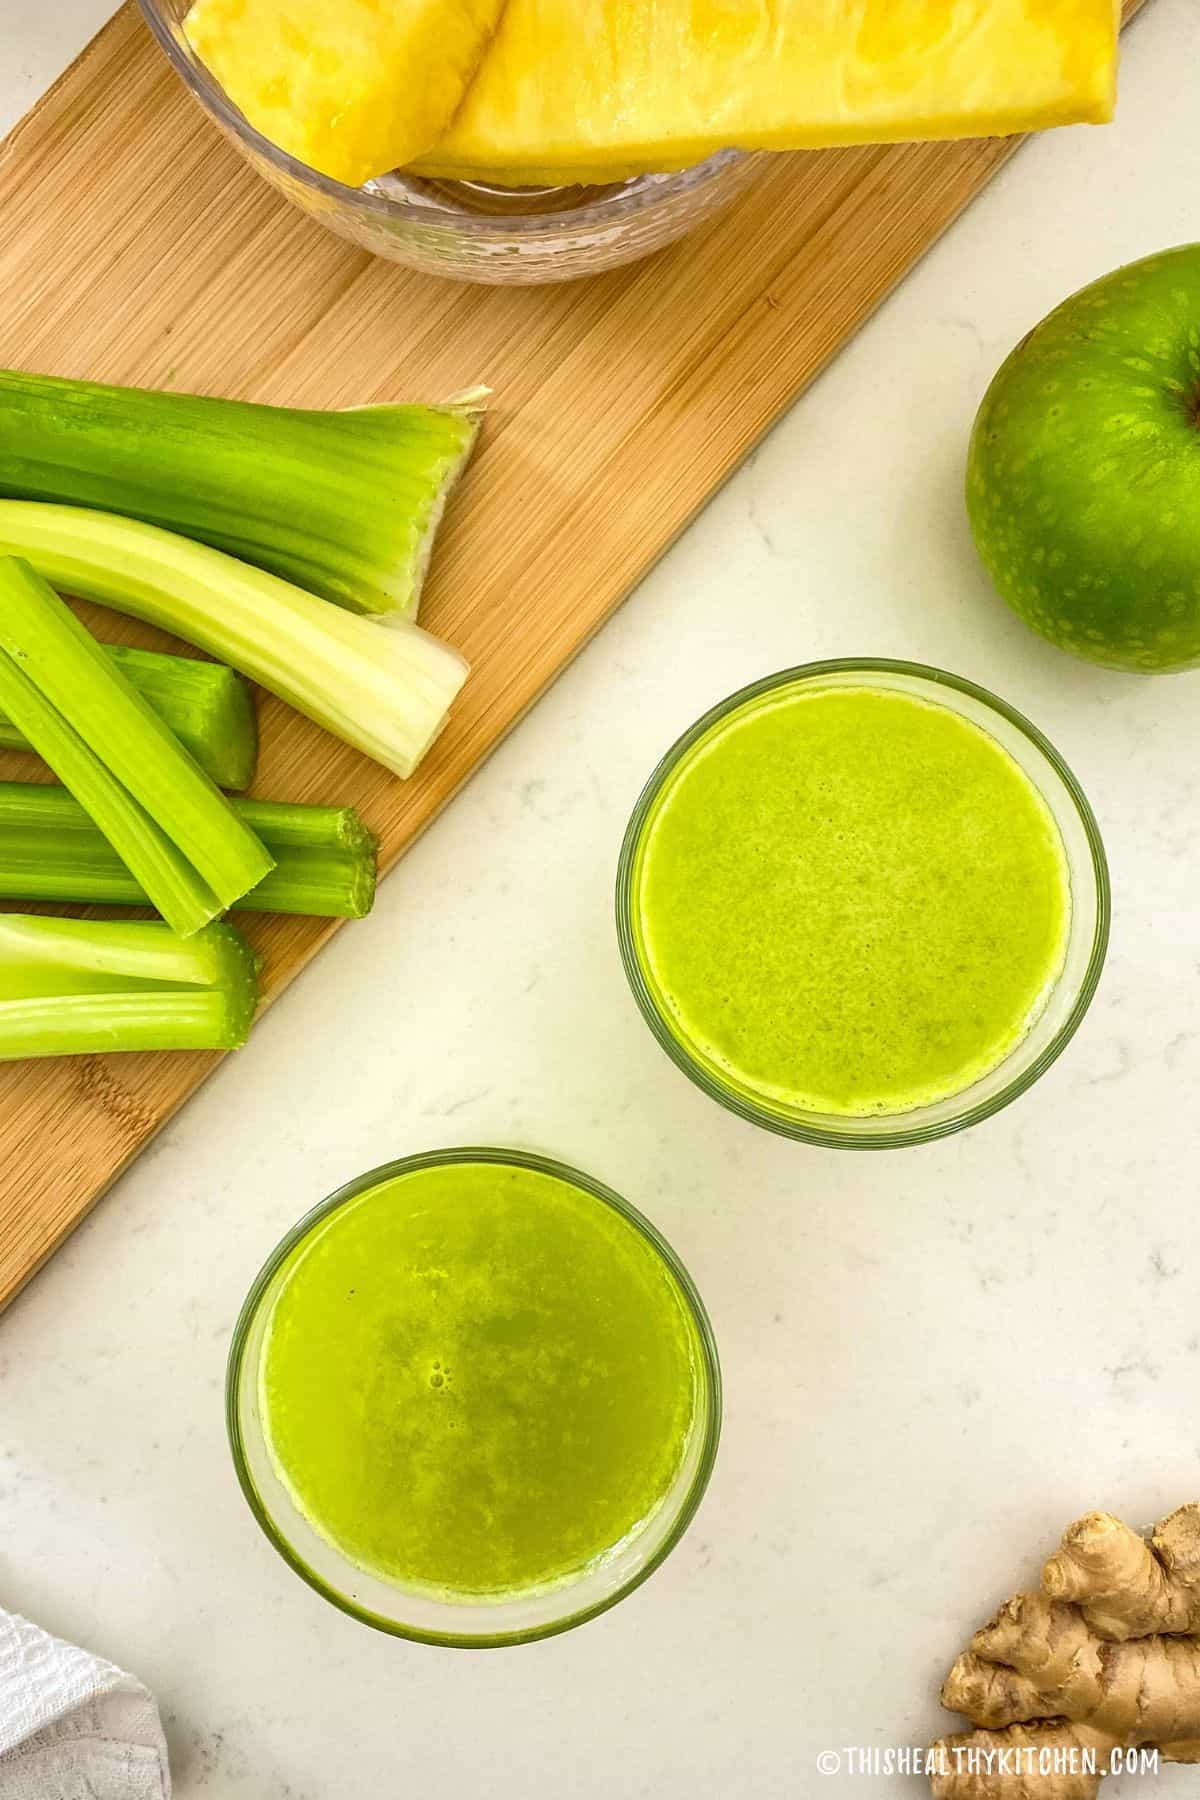 Two cups of green juice with celery, pineapple and green apple in the background.